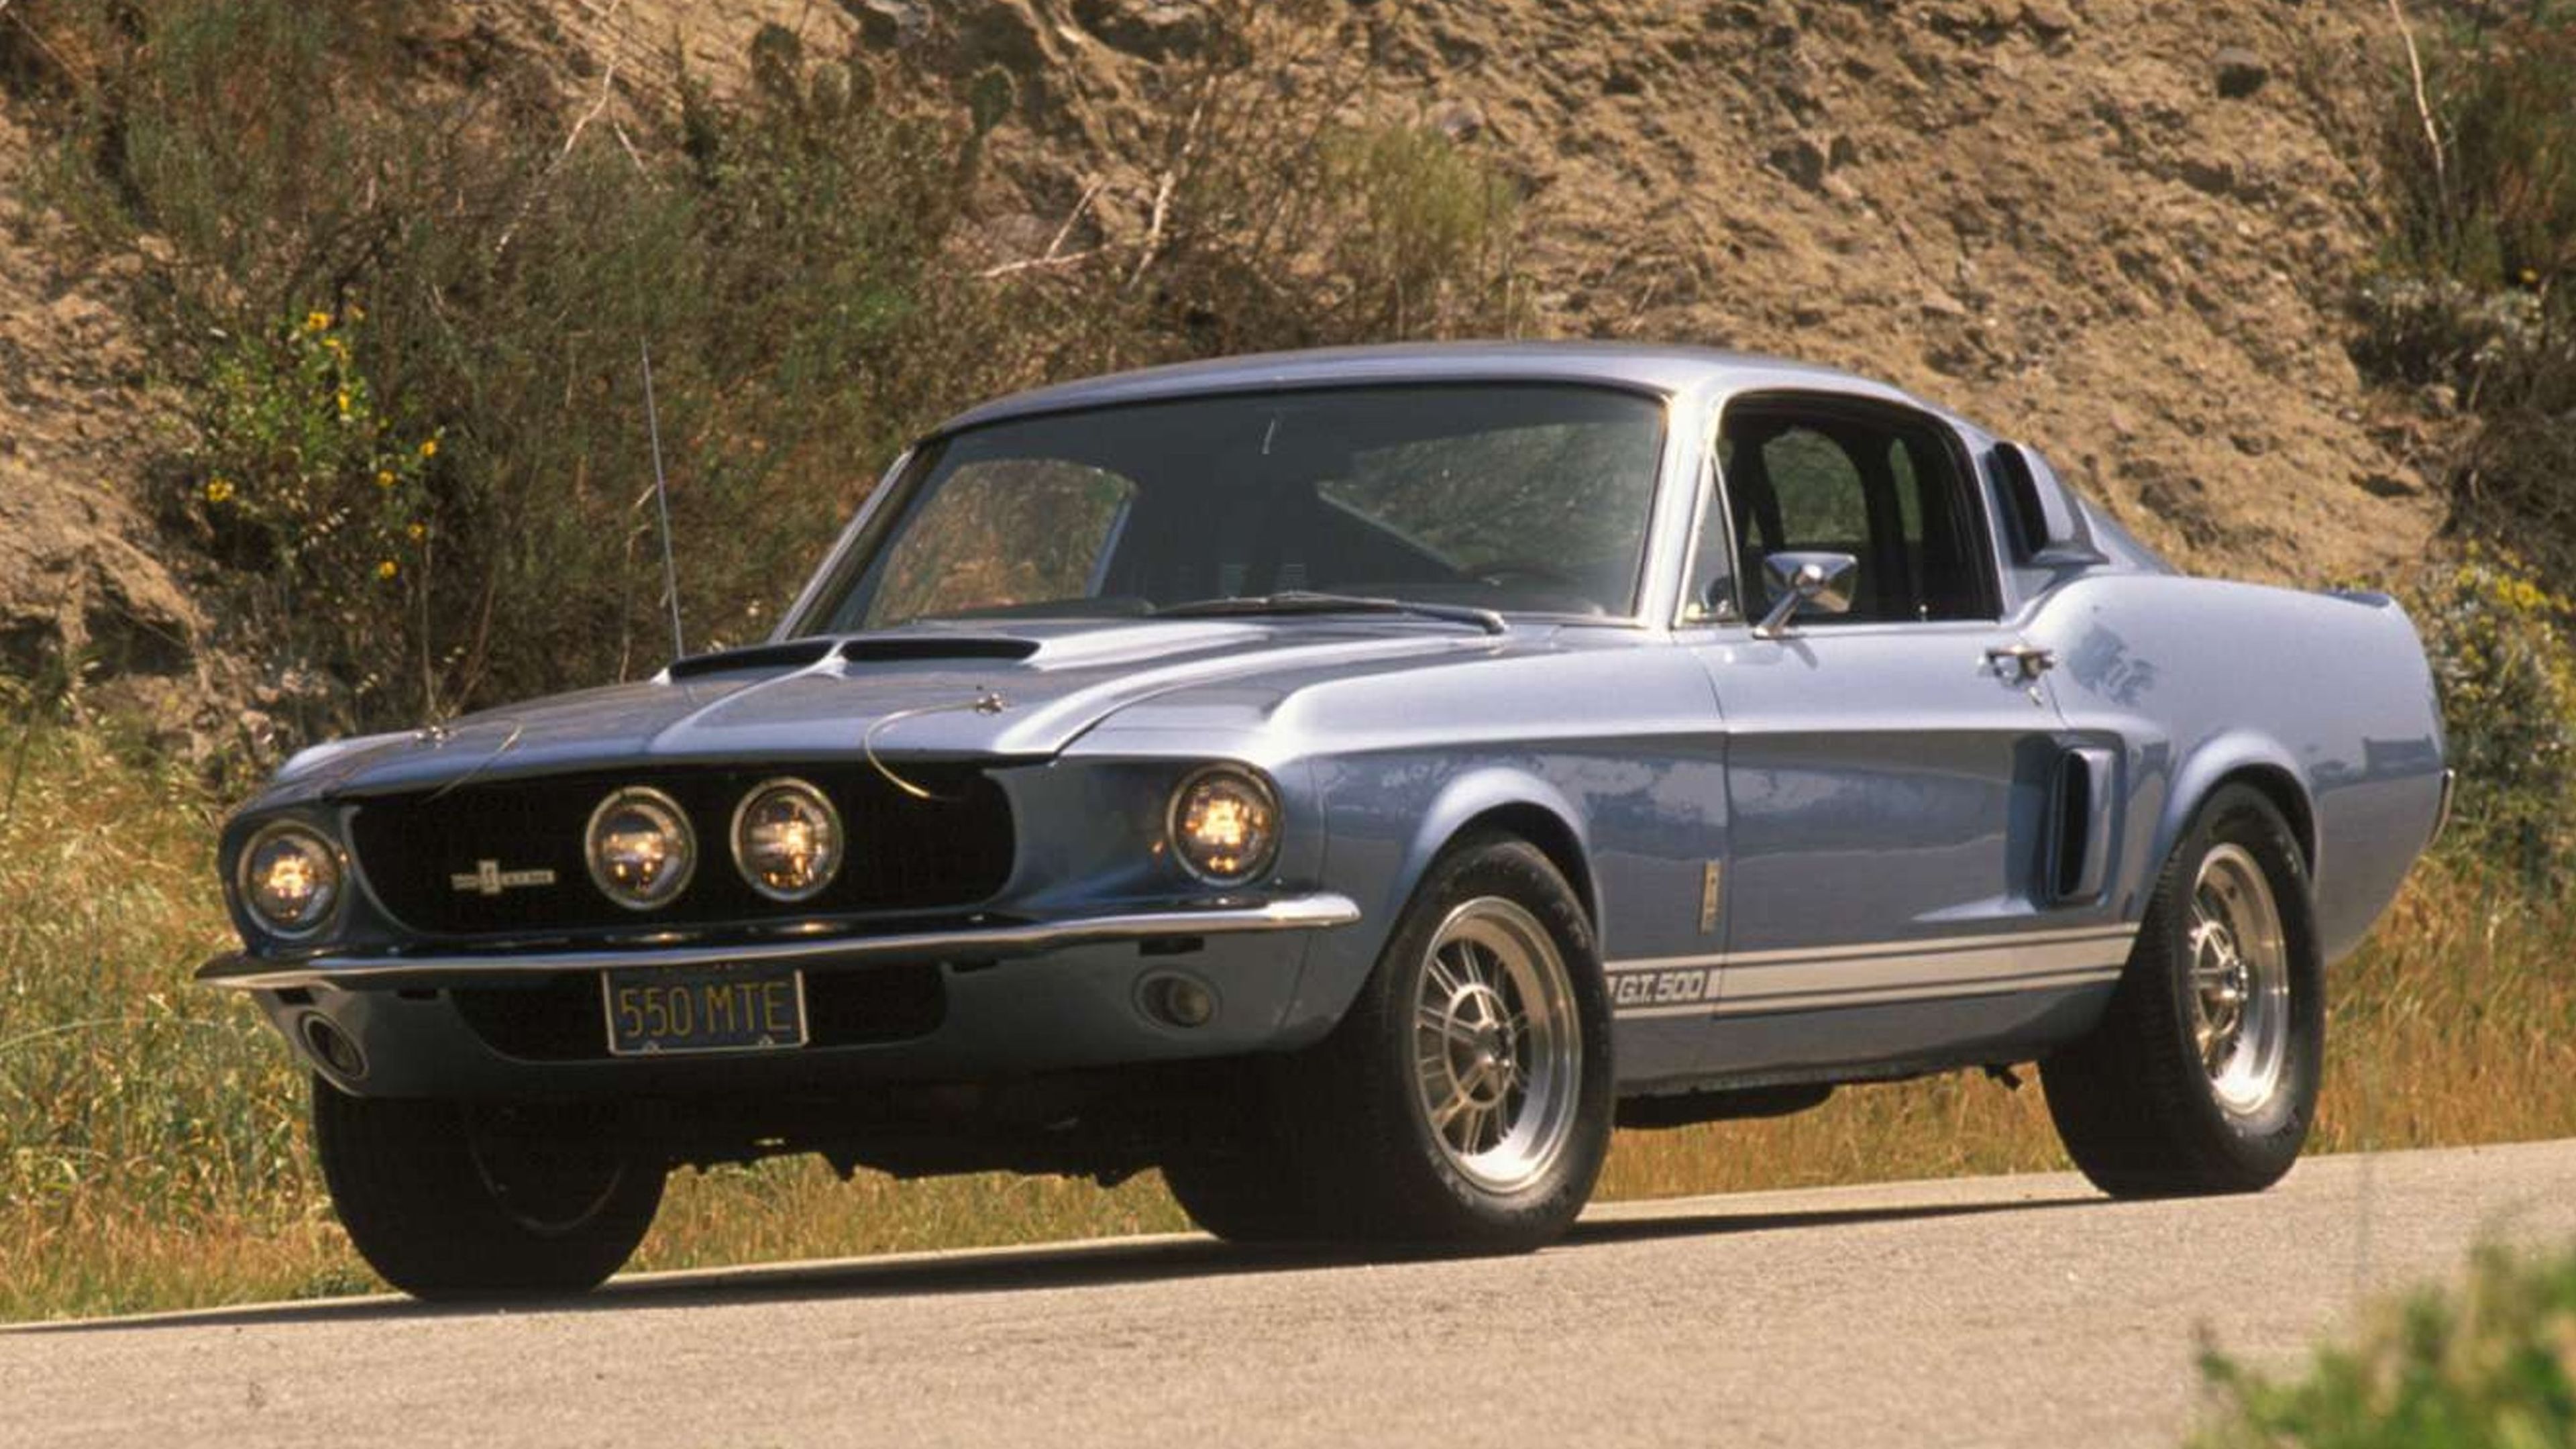 historia-ford-mustang-60-anos-3306691.jp